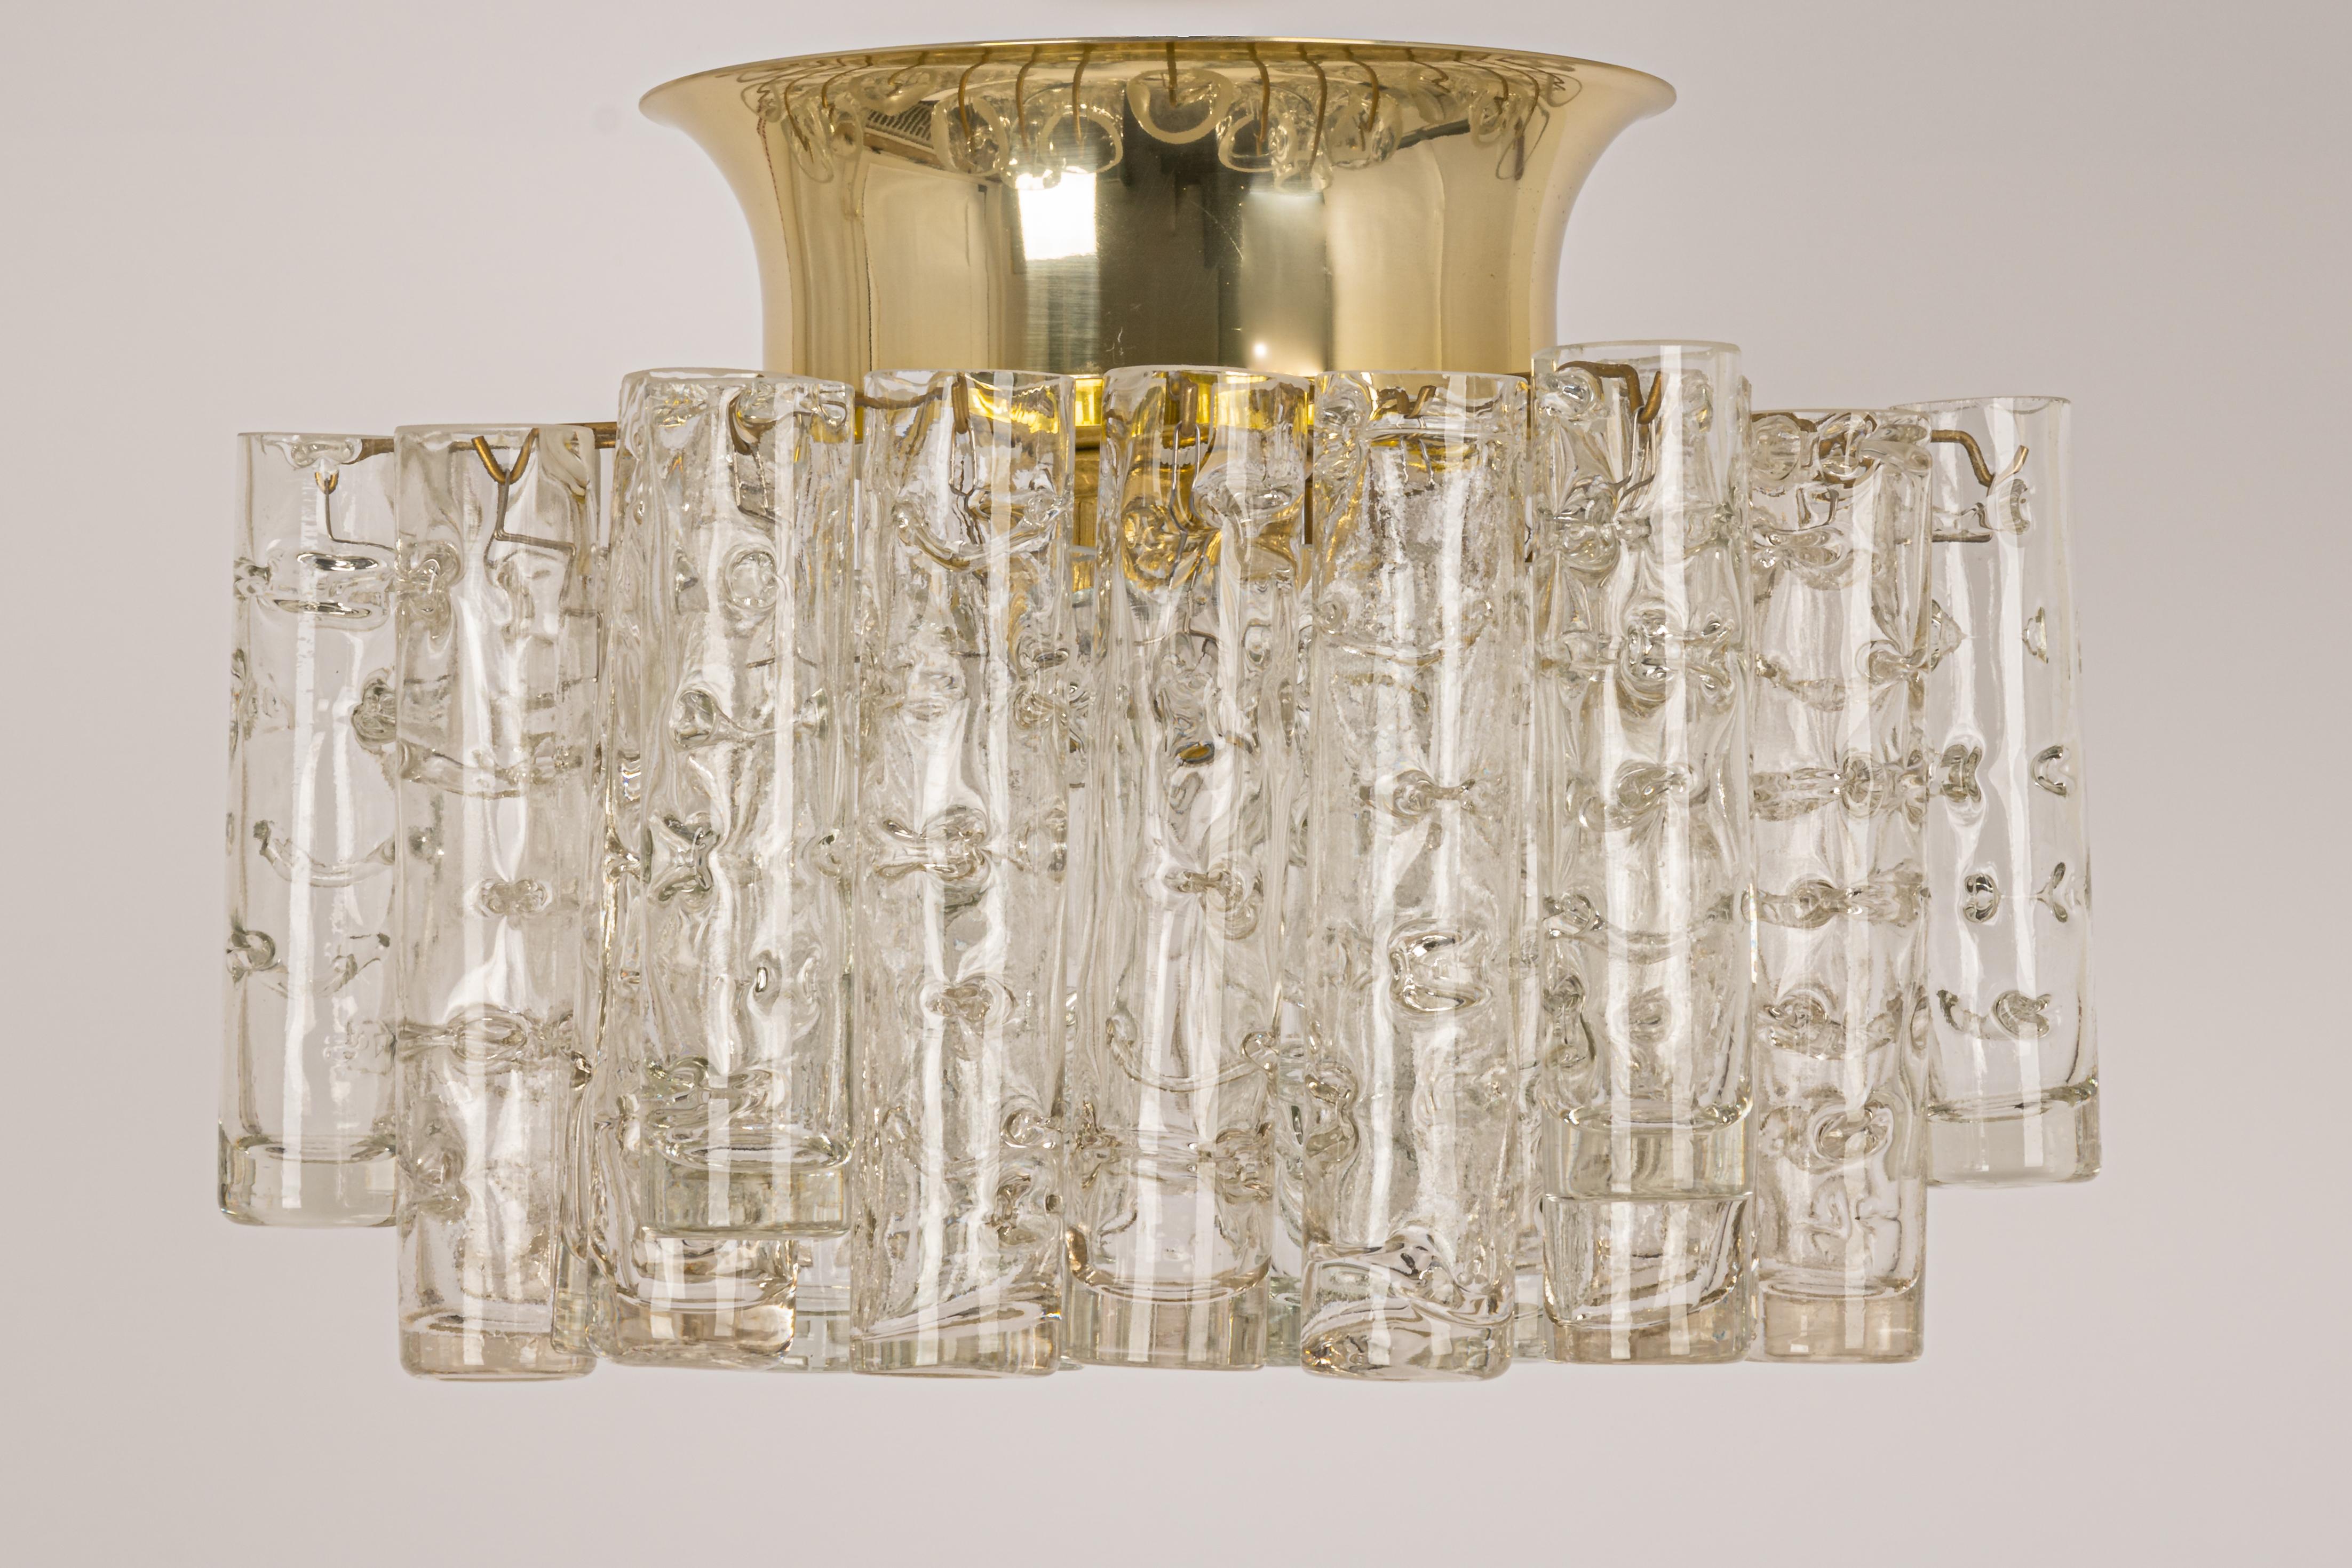 1 of 2 Fantastic mid-century chandeliers by Doria, Germany, manufactured circa 1970-1979. A lot of Murano glass cylinders are suspended from the fixture.
Heavy quality and in very good condition. Cleaned, well-wired, and ready to use.

The